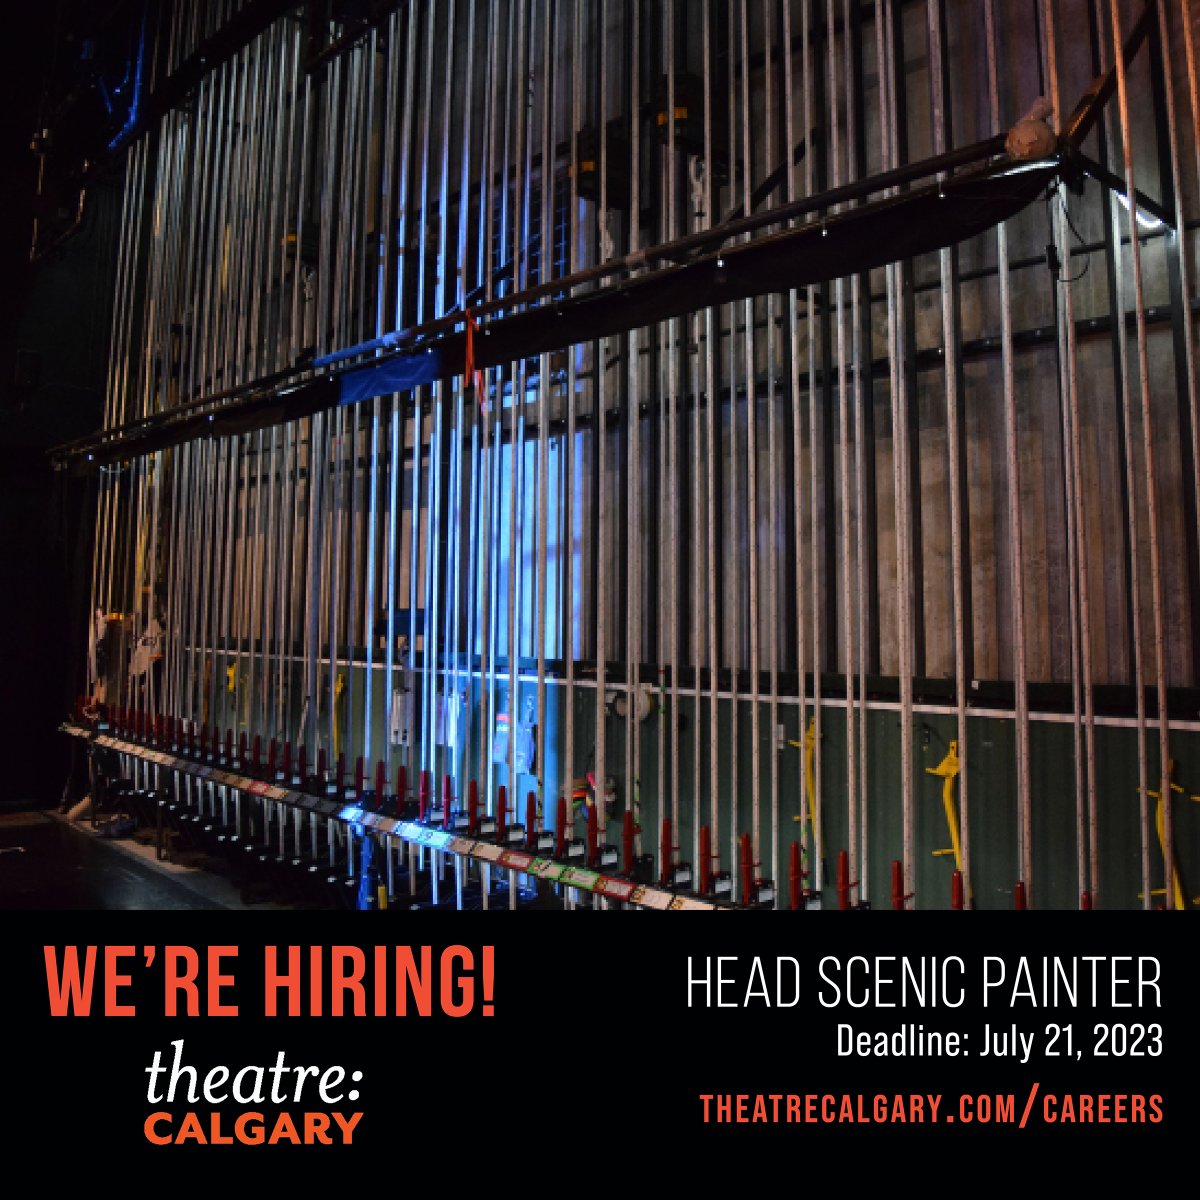 We're hiring a Head Scenic Painter, responsible for organizing  & executing the painting of our scenery. We operate under a collective agreement with @Iatselocal212. Closing date for applications is July 21, 2023. Full job posting: theatrecalgary.com/careers. #yyc #yycarts